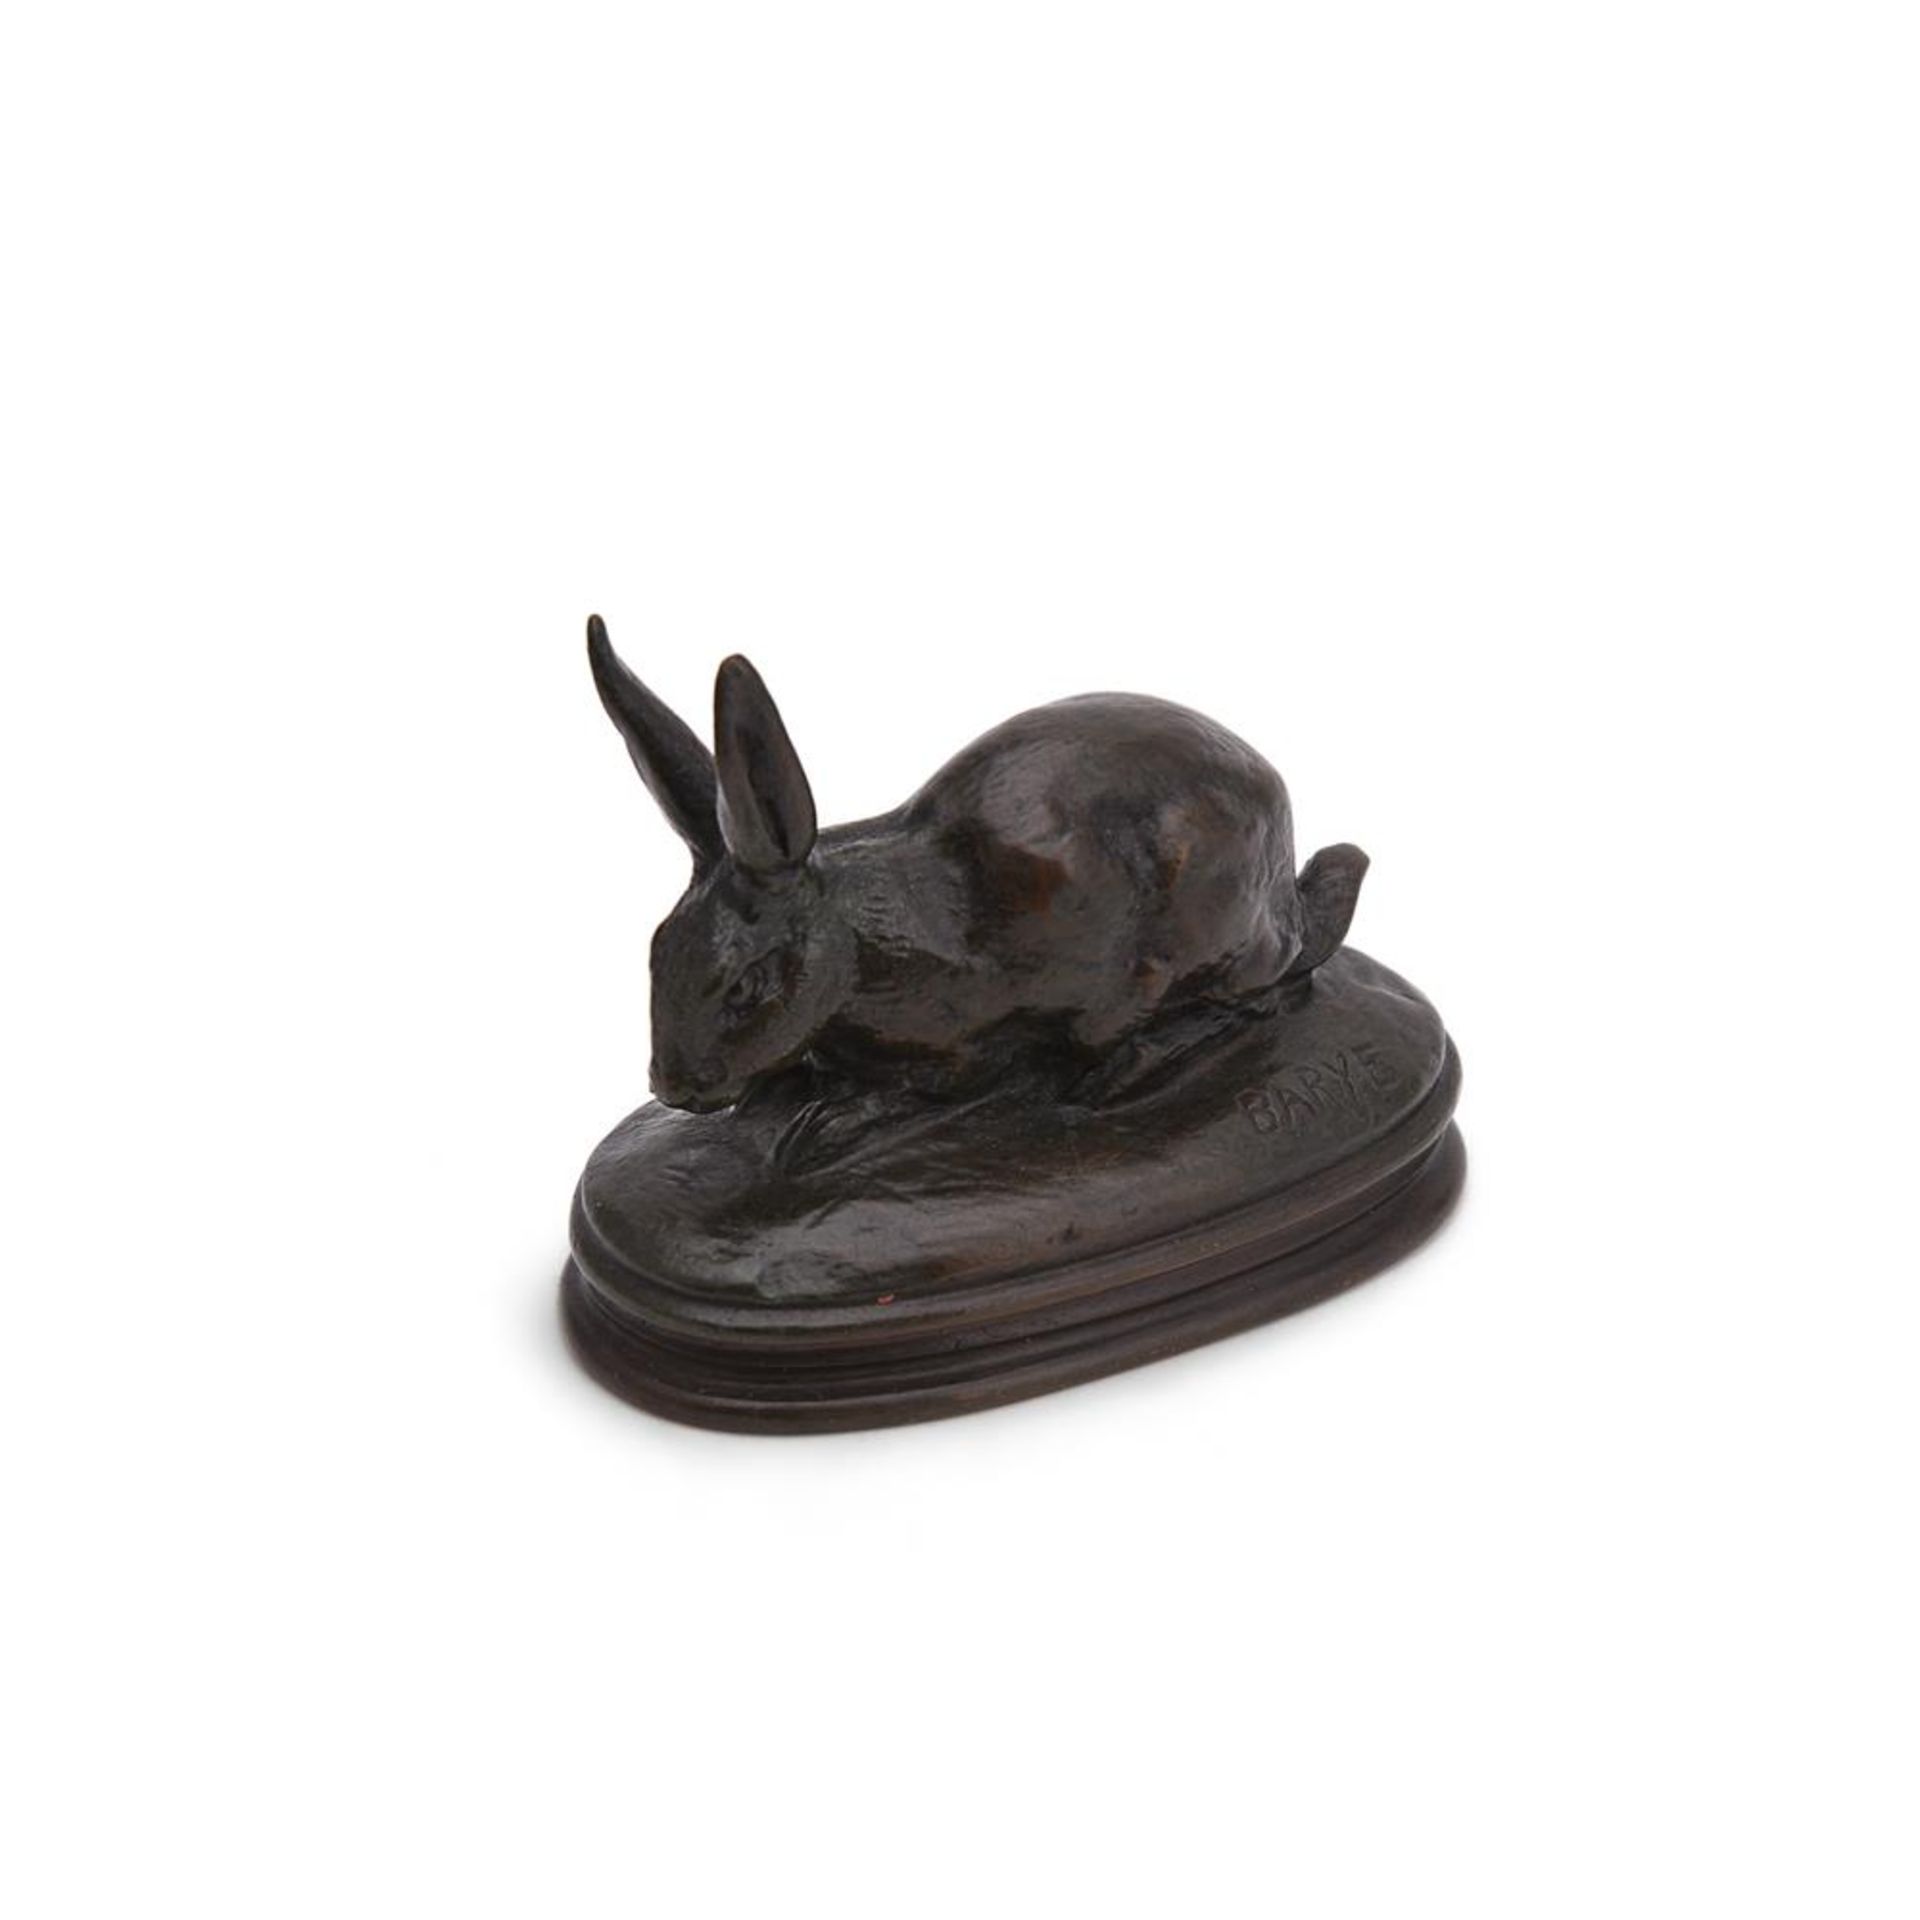 ANTOINE-LOUIS BARYE (FRENCH, 1795-1875), A BRONZE MODEL OF A CROUCHING RABBIT - Image 3 of 5